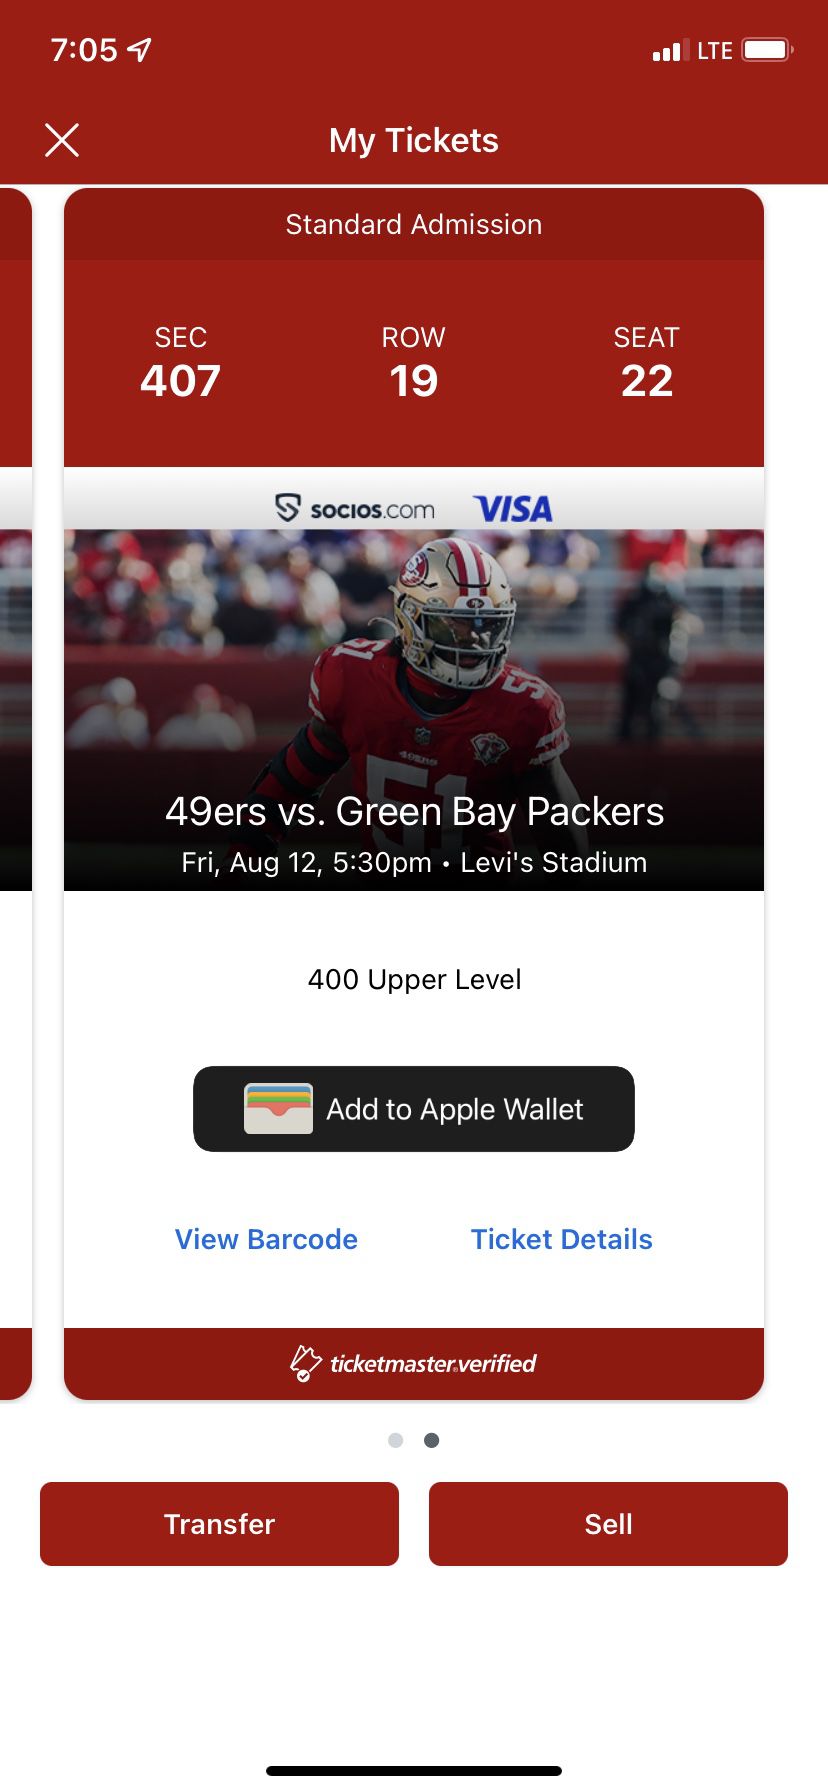 2 Tix To Packers @49ers